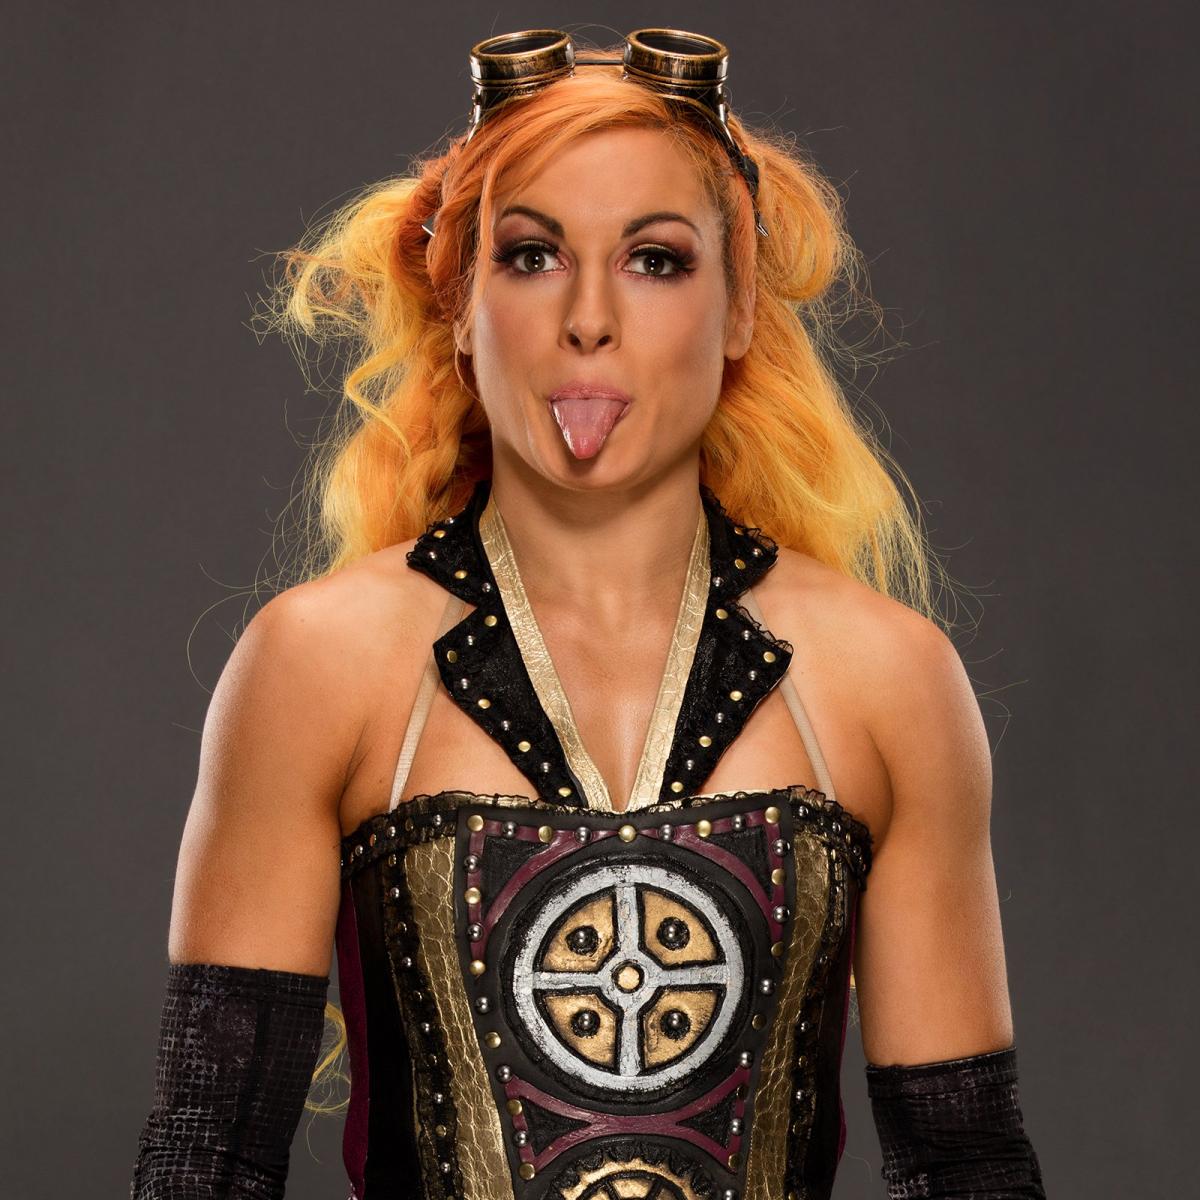 Day 27 of missing Becky Lynch from our screens!